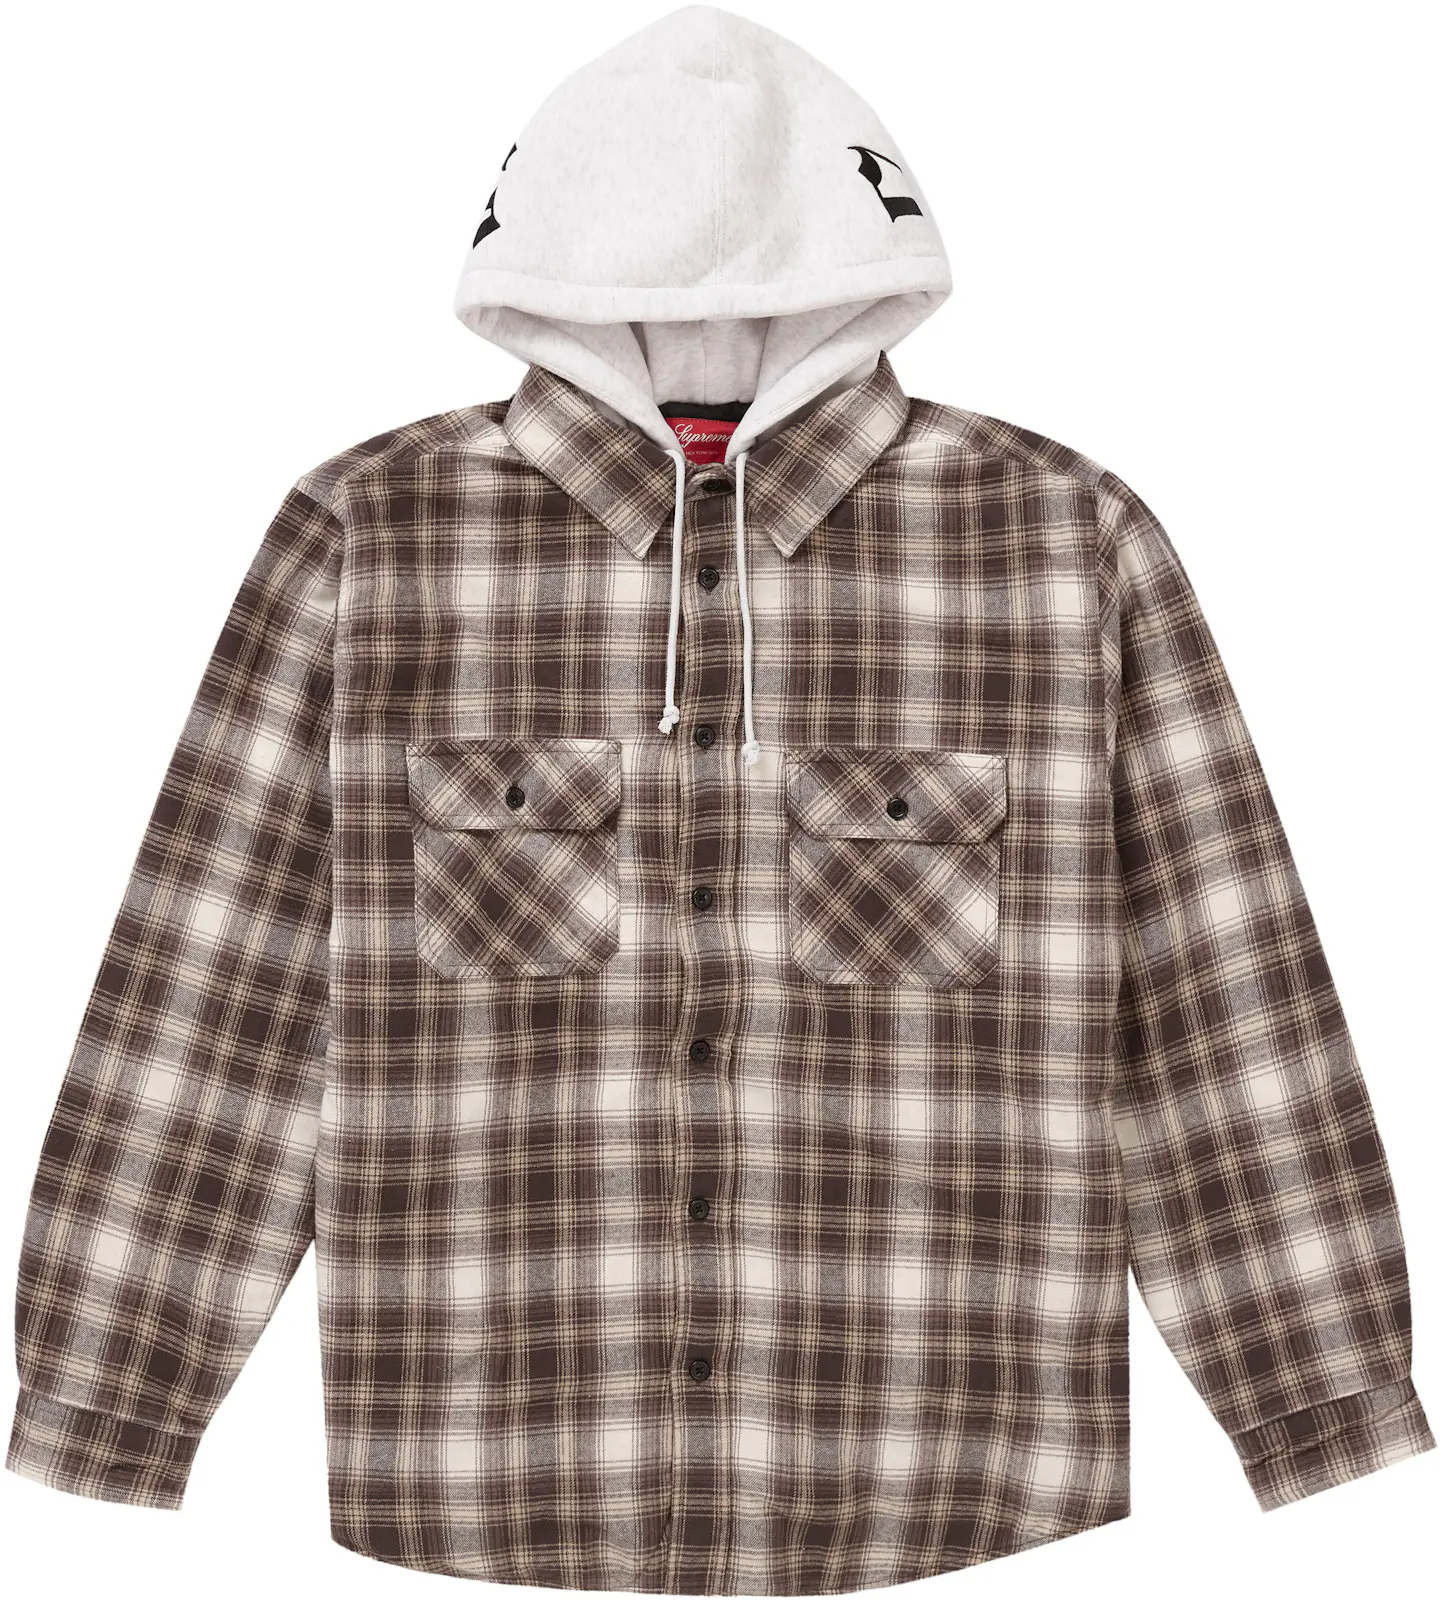 Supreme Hooded Flannel Zip Up Shirt Brown - FW21 - MX